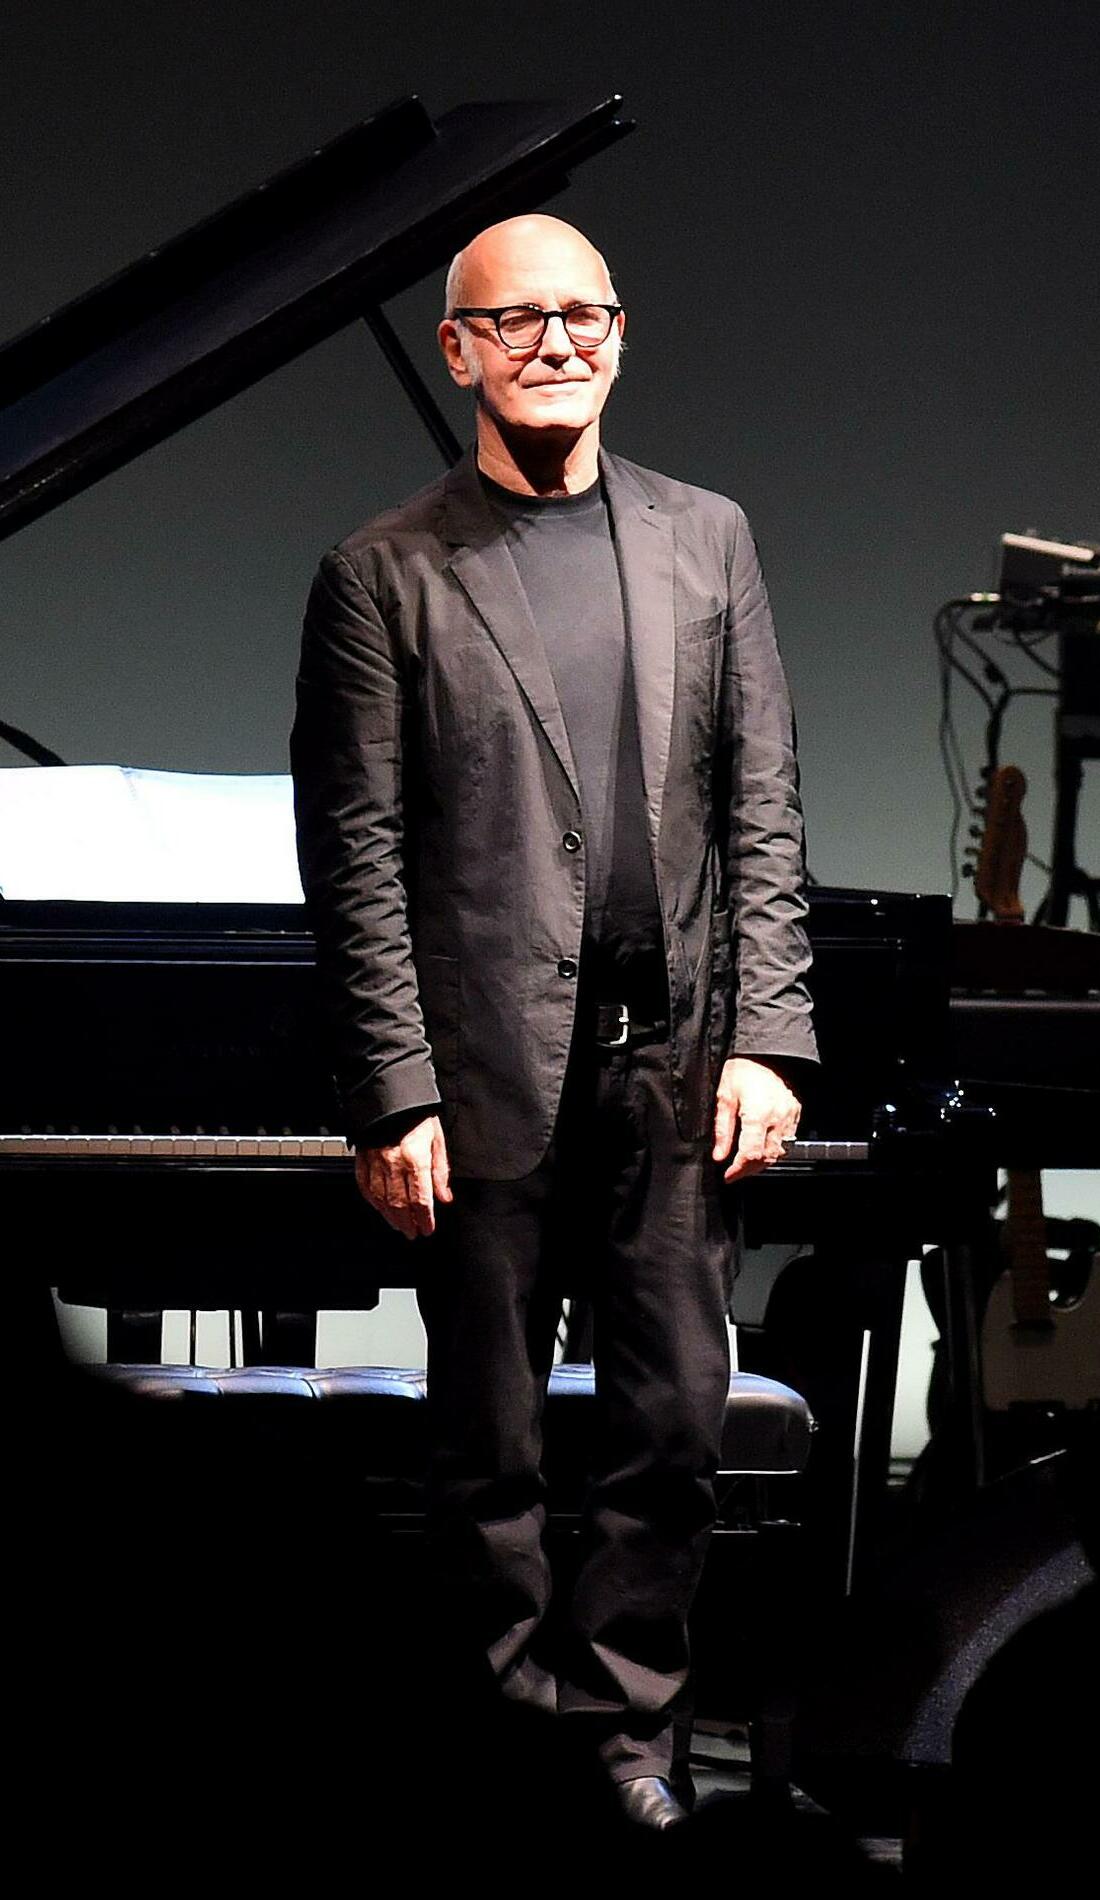 Ludovico Einaudi Tickets Seatgeek Complete list of ludovico einaudi music featured in movies, tv shows and video games. ludovico einaudi tickets seatgeek